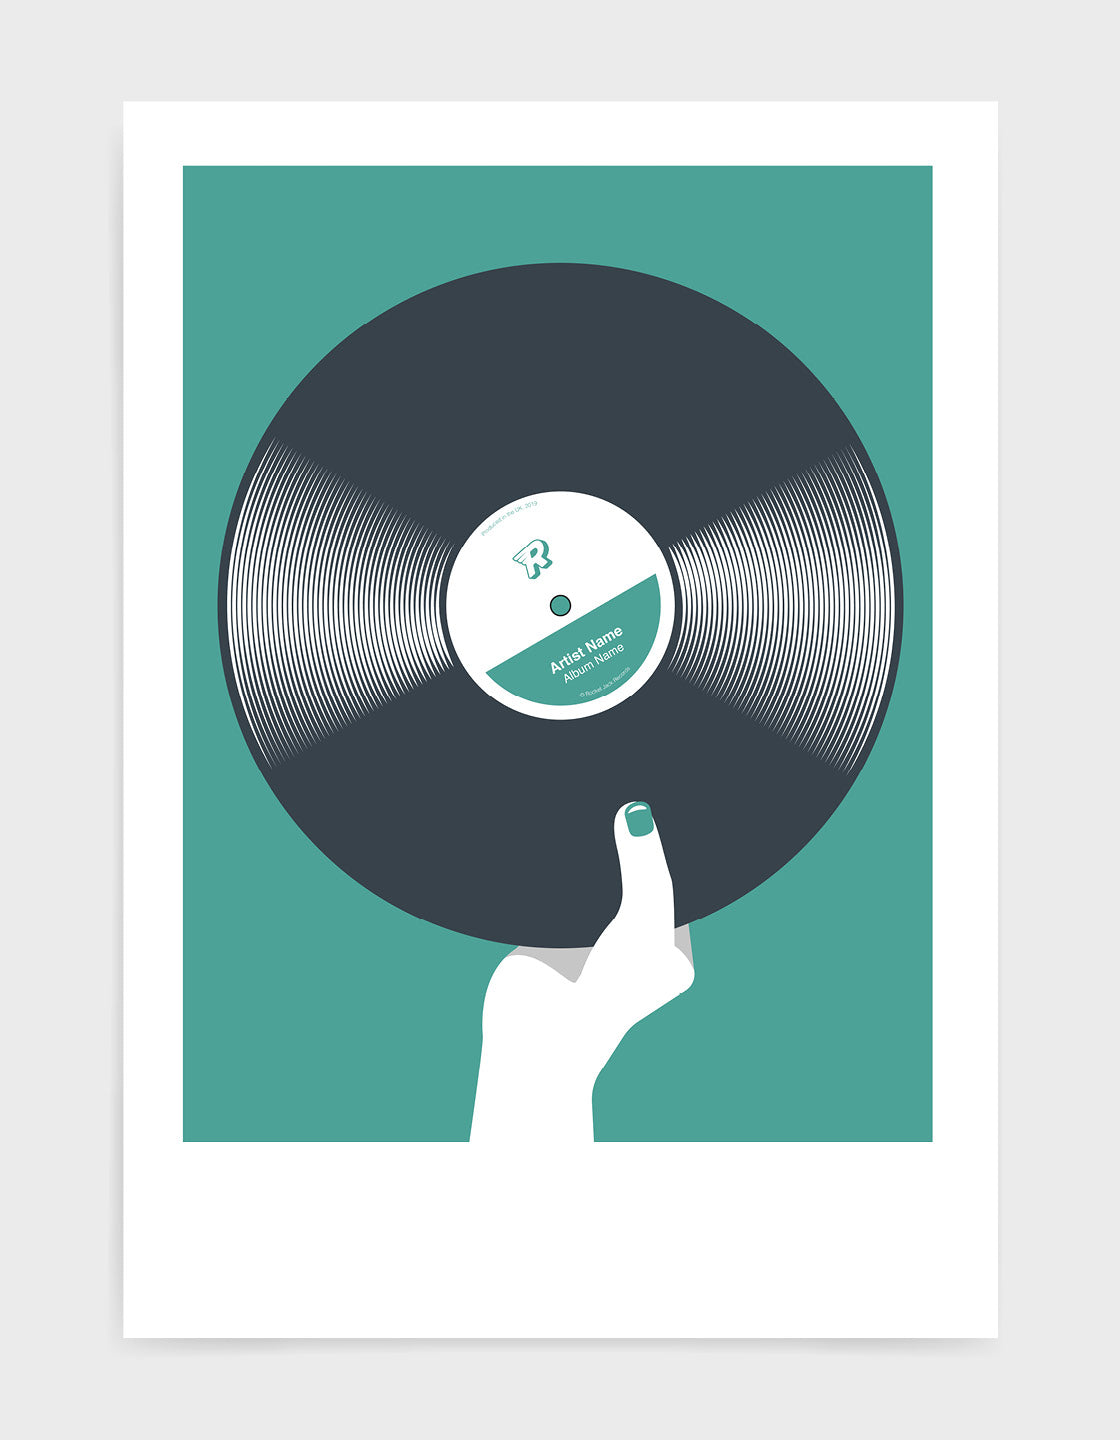 art print image of a Personalised black vinyl record held in a hand with red nails against a green background